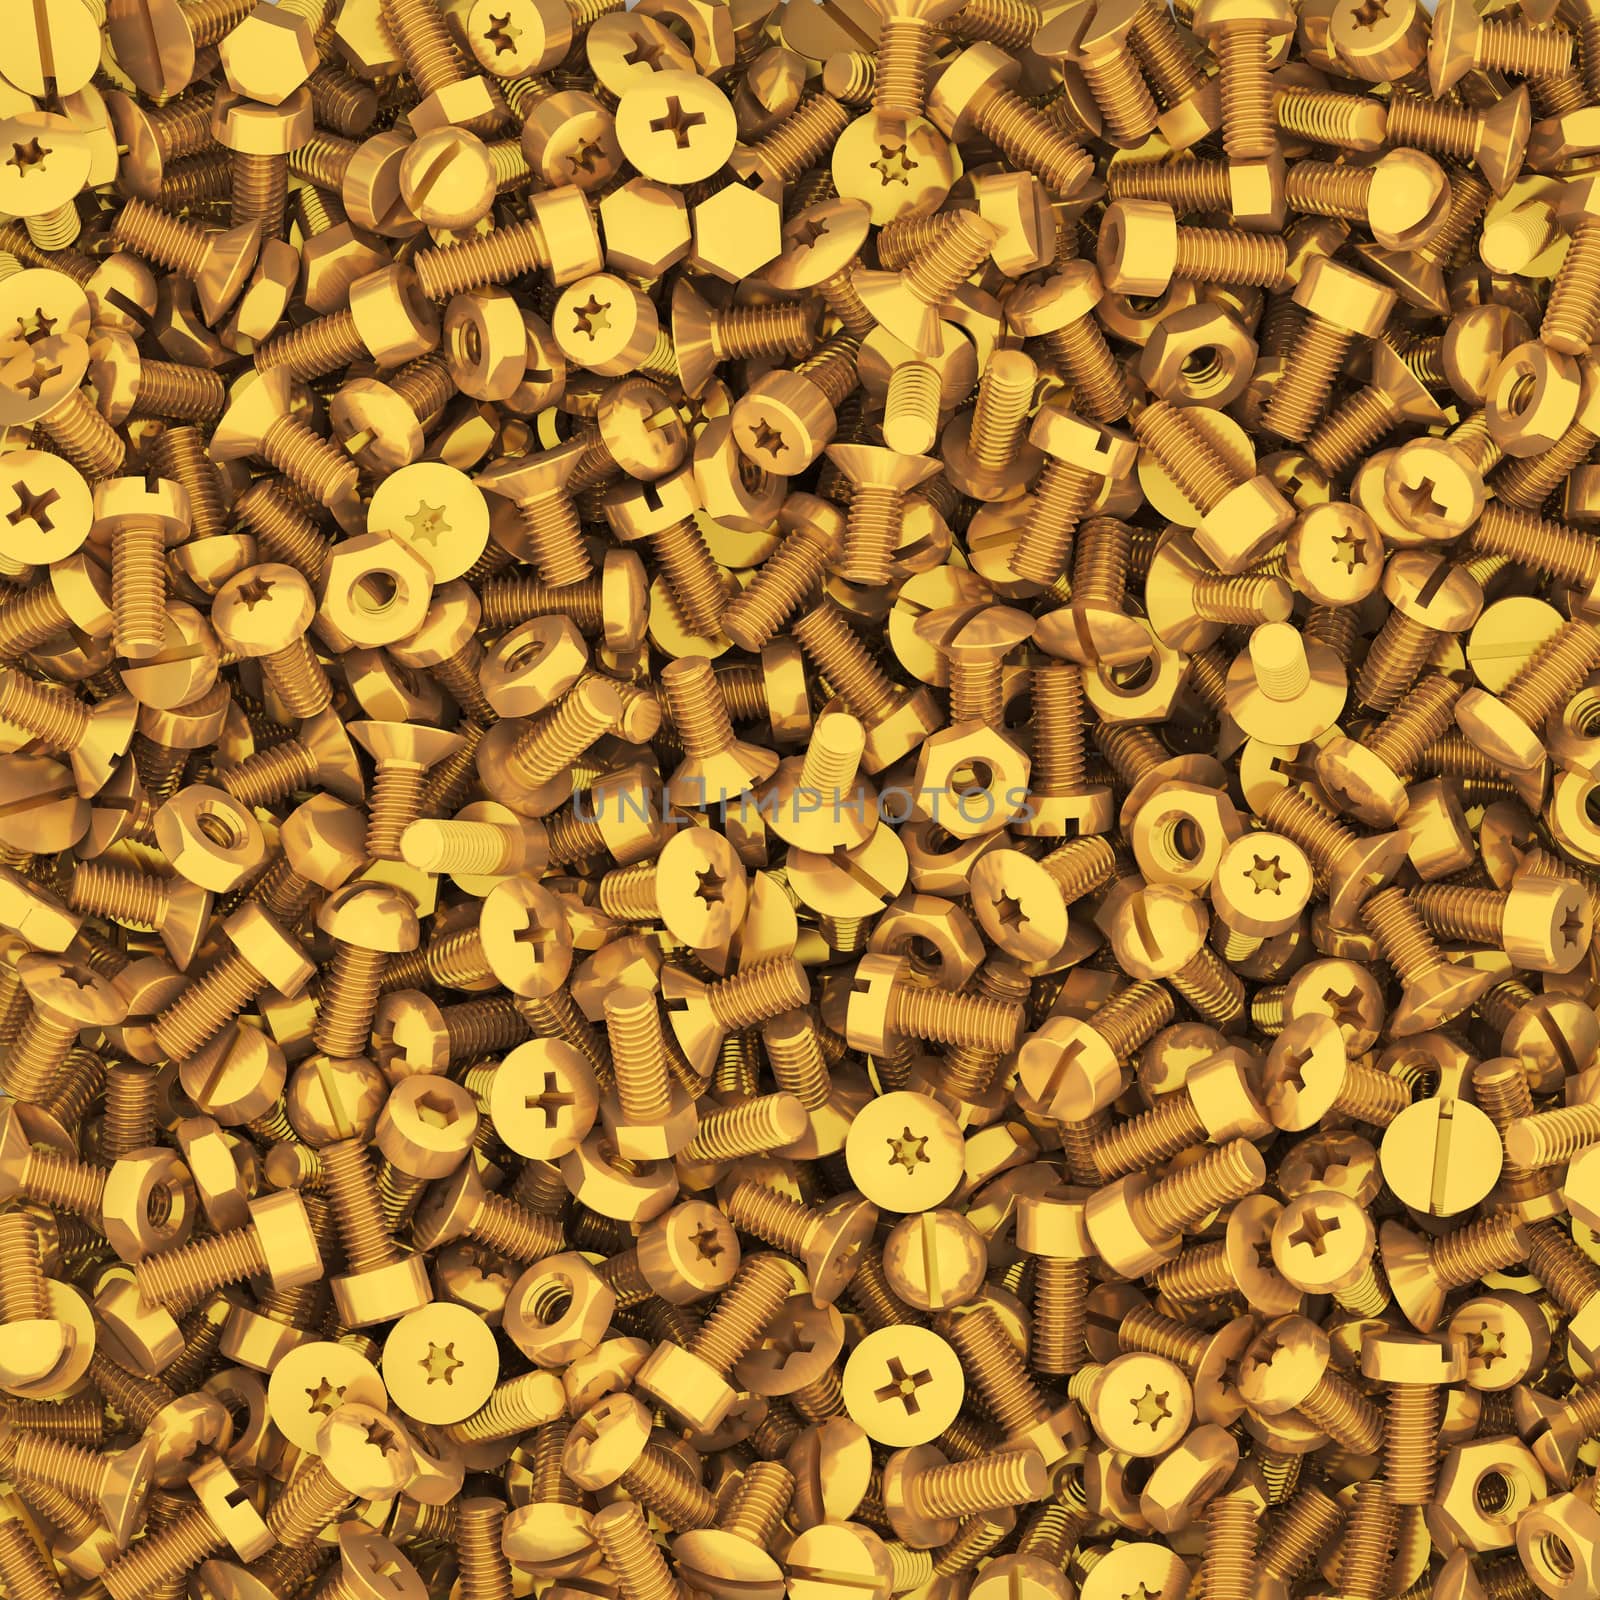 Background of multiple gold bolts and nuts. High resolution 3D image